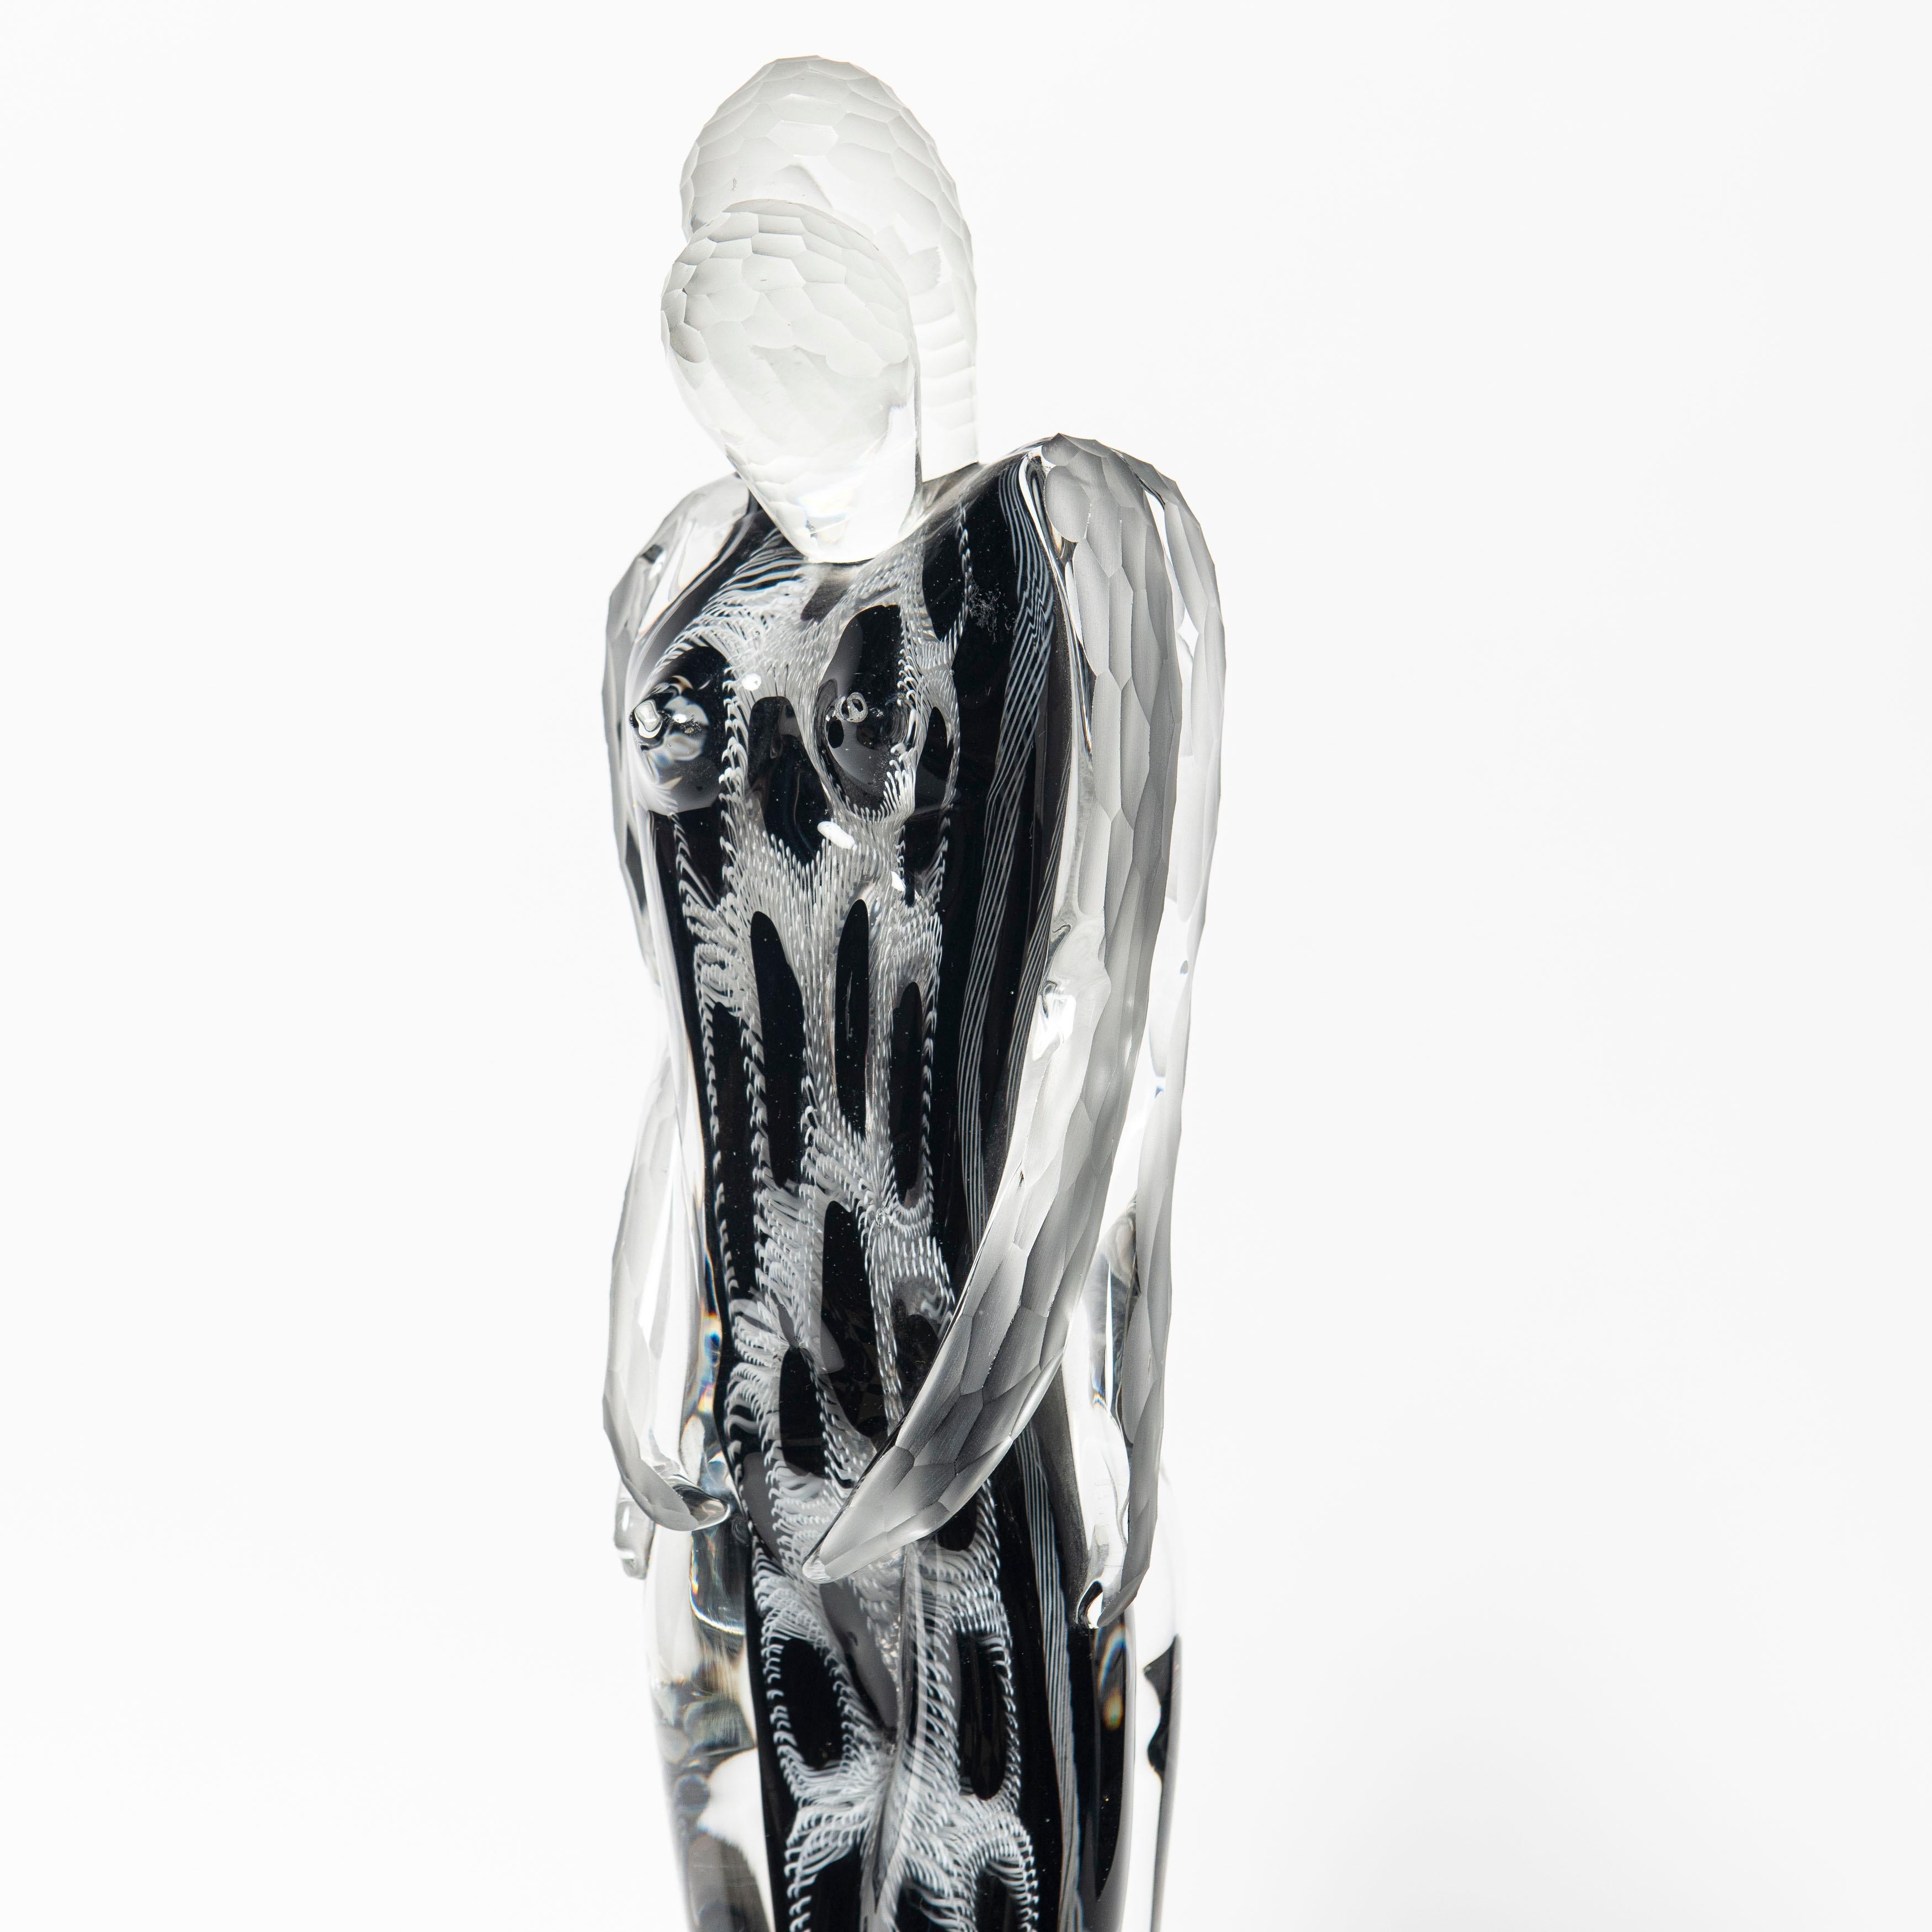 Italian Murano Glass Lovers Sculpture Signed Schiavon, Italy, 2012 For Sale